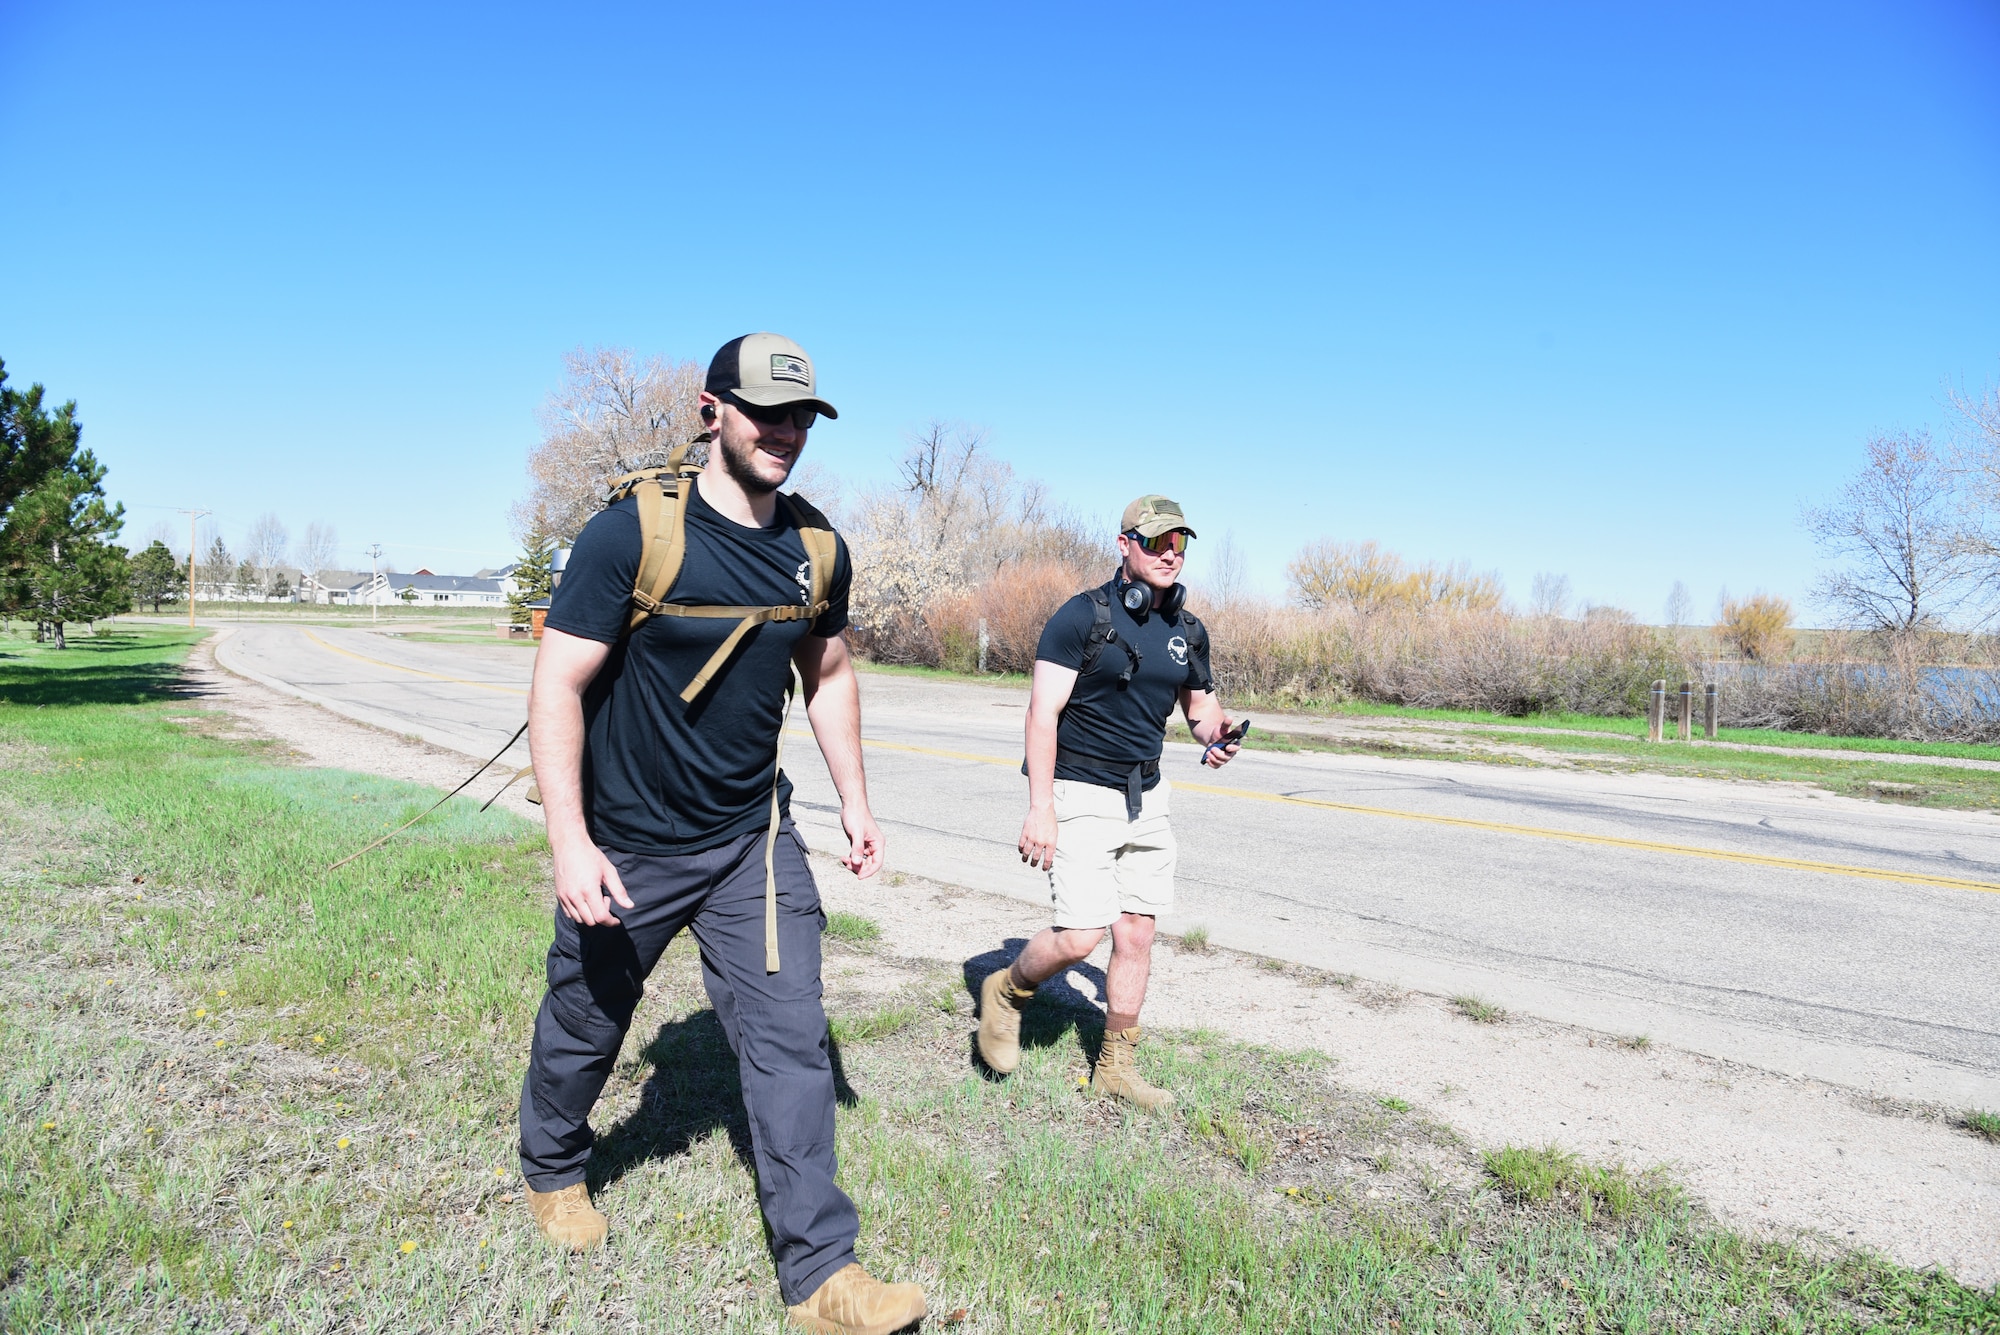 Sergeant Rosenquist and Airman Cole start their ruck march